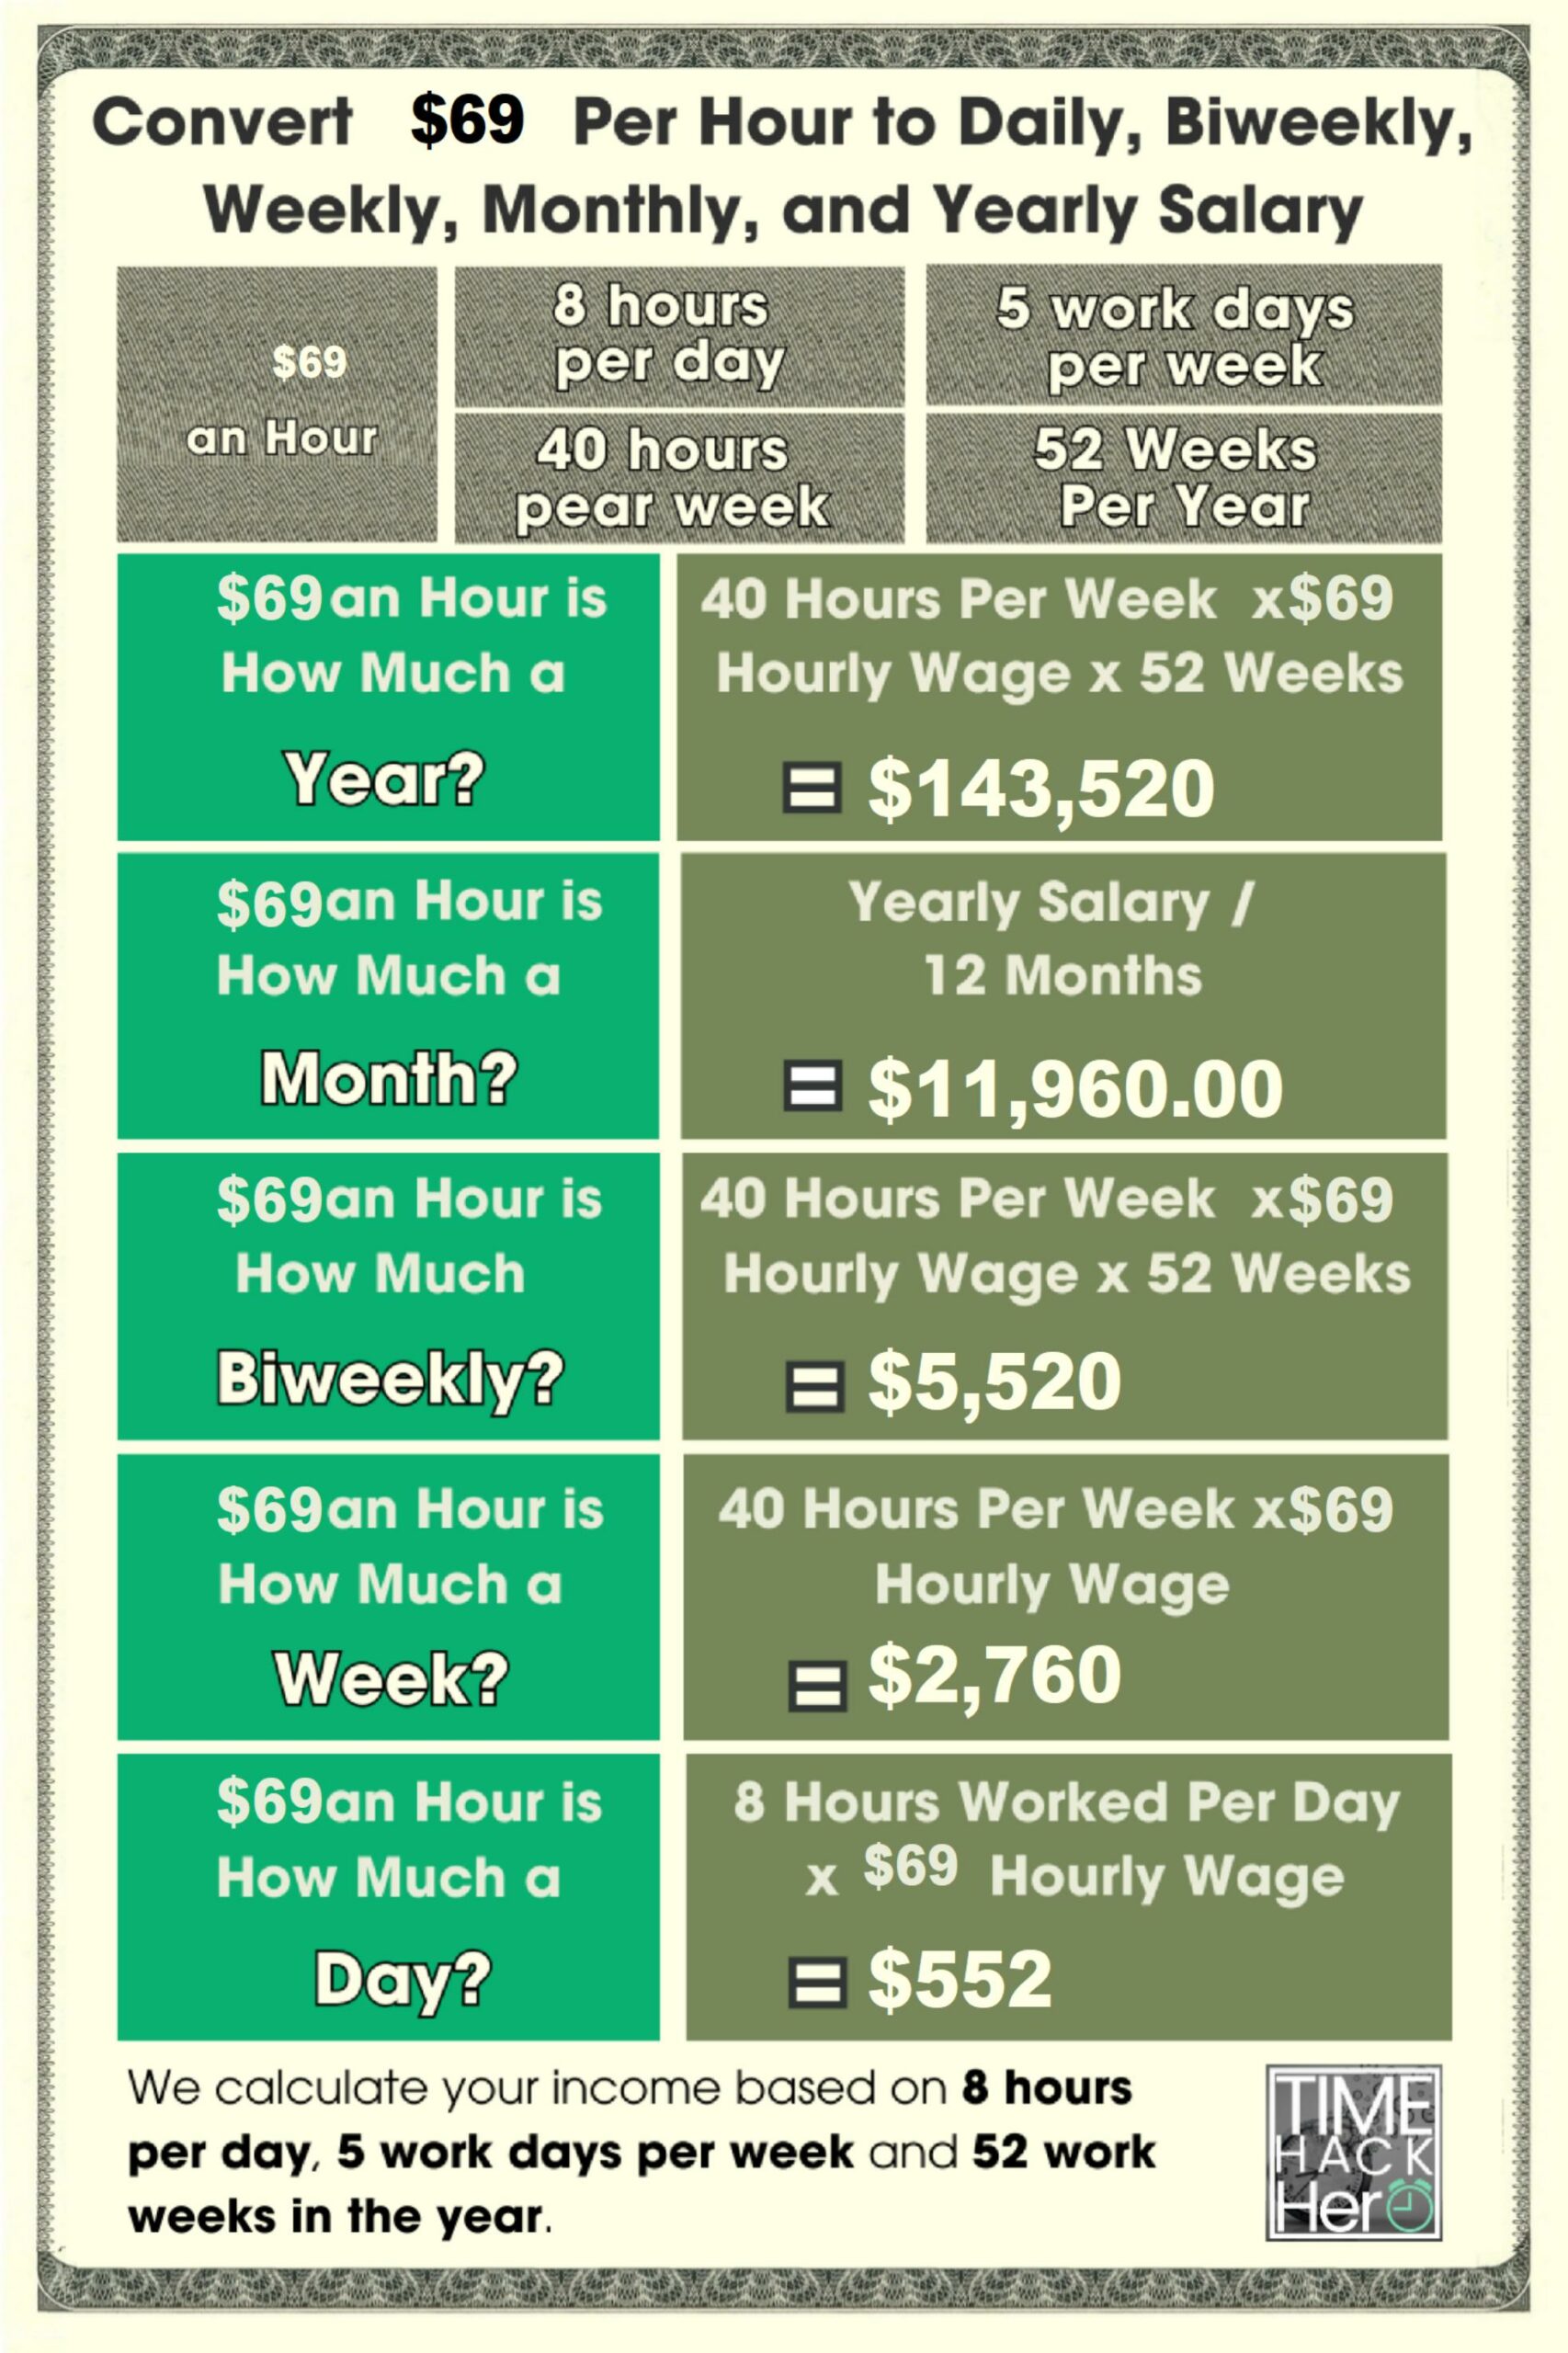 Convert $69 Per Hour to Weekly, Monthly, and Yearly Salary